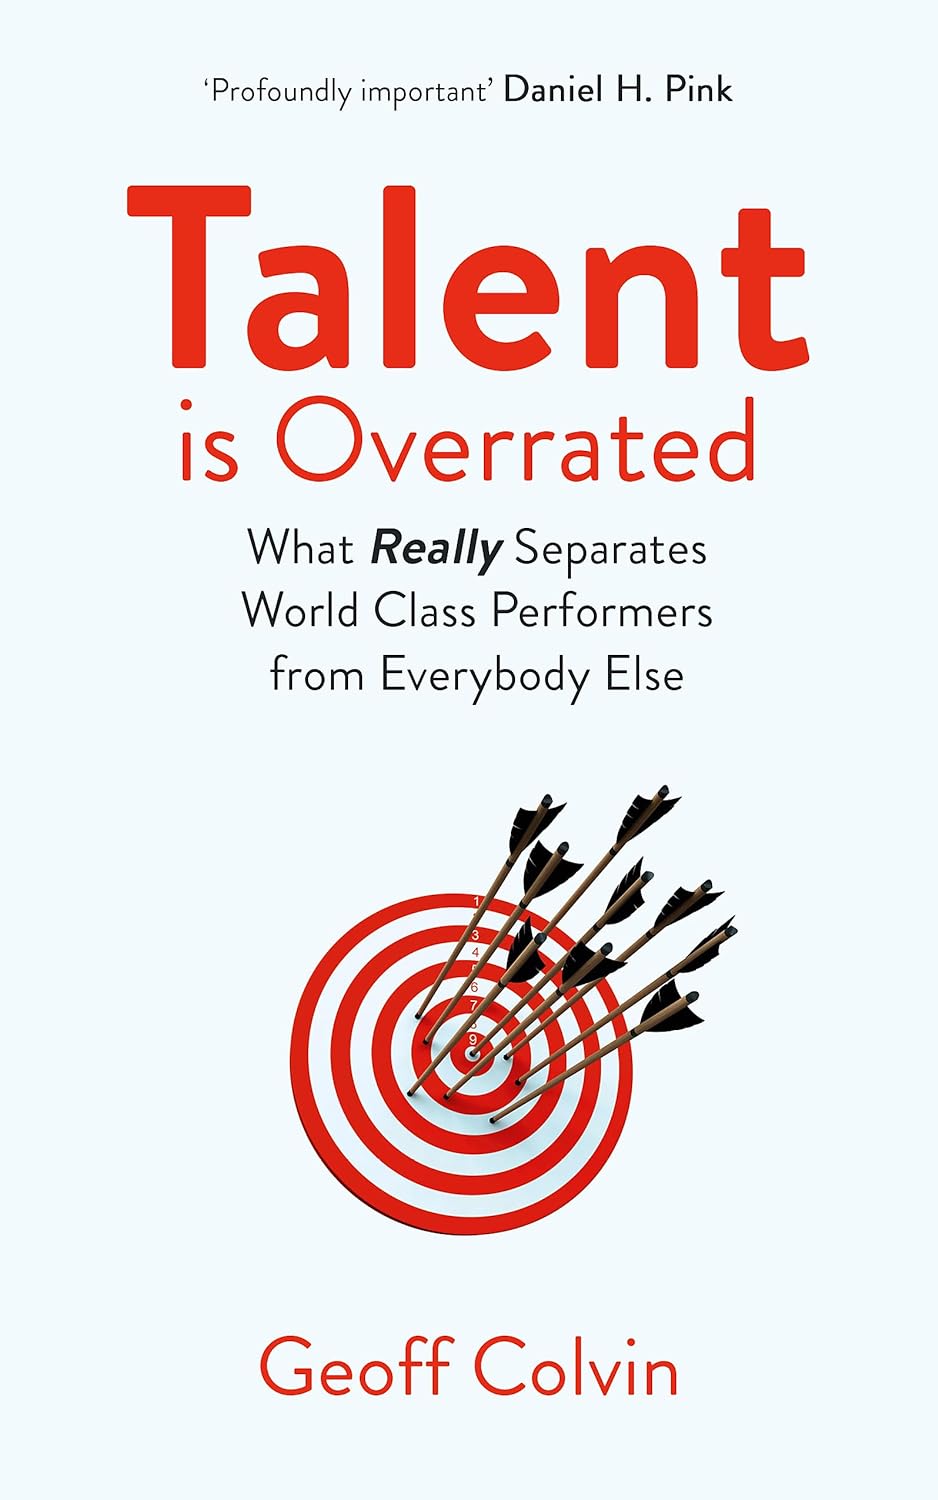 Geoff Colvin - Talent is Overrated 2nd Edition. What Really Separates World-Class Performers from Everybody Else